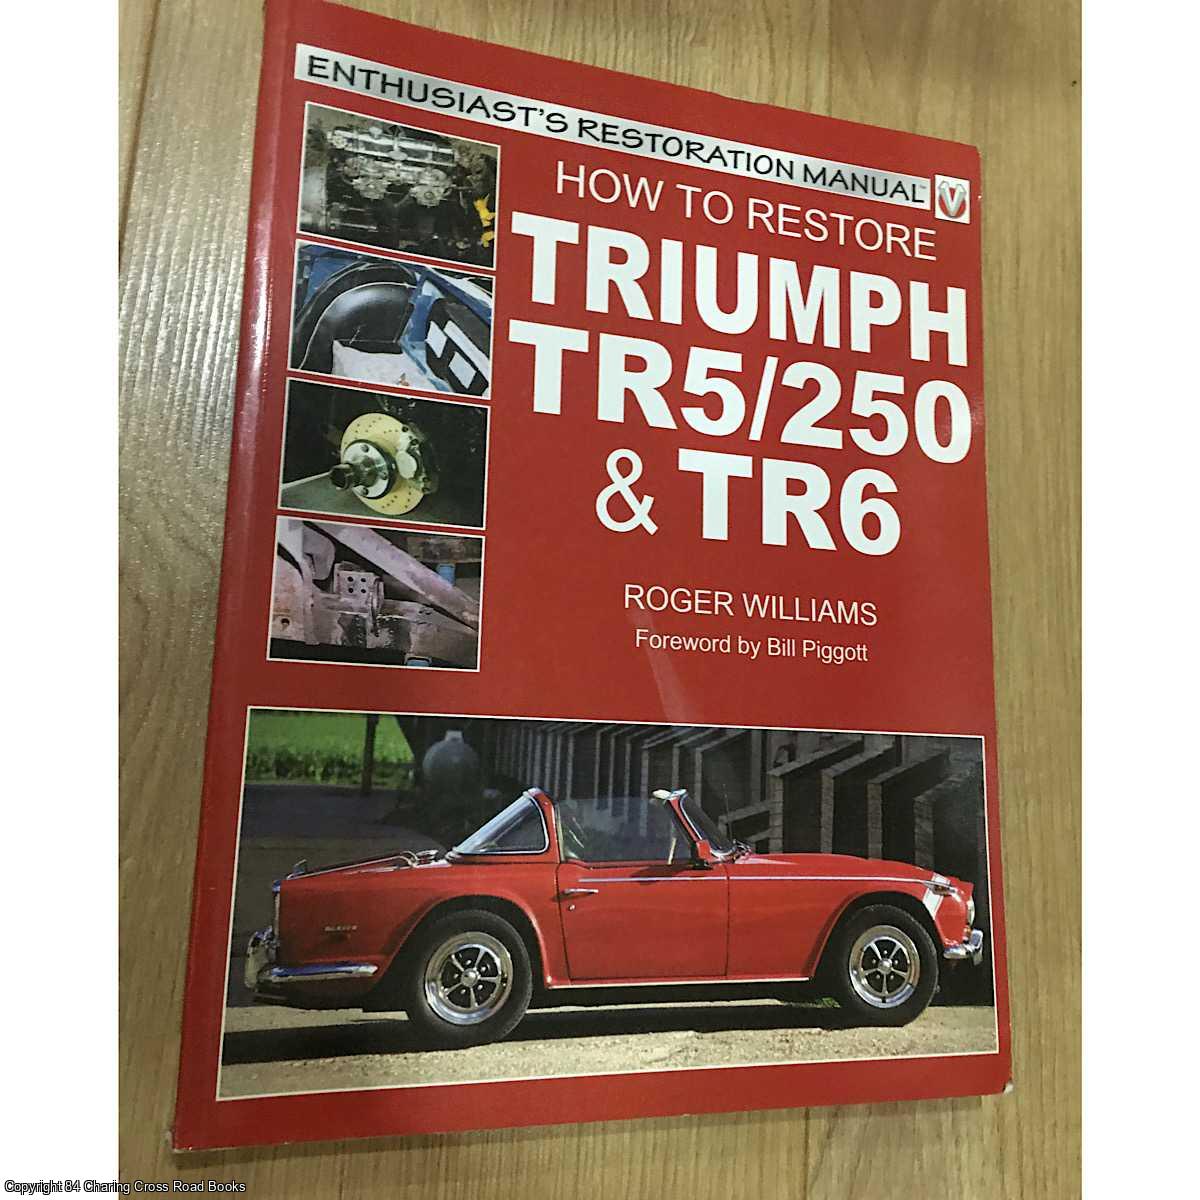 Williams, Roger - How to Restore Triumph TR5/250 and TR6